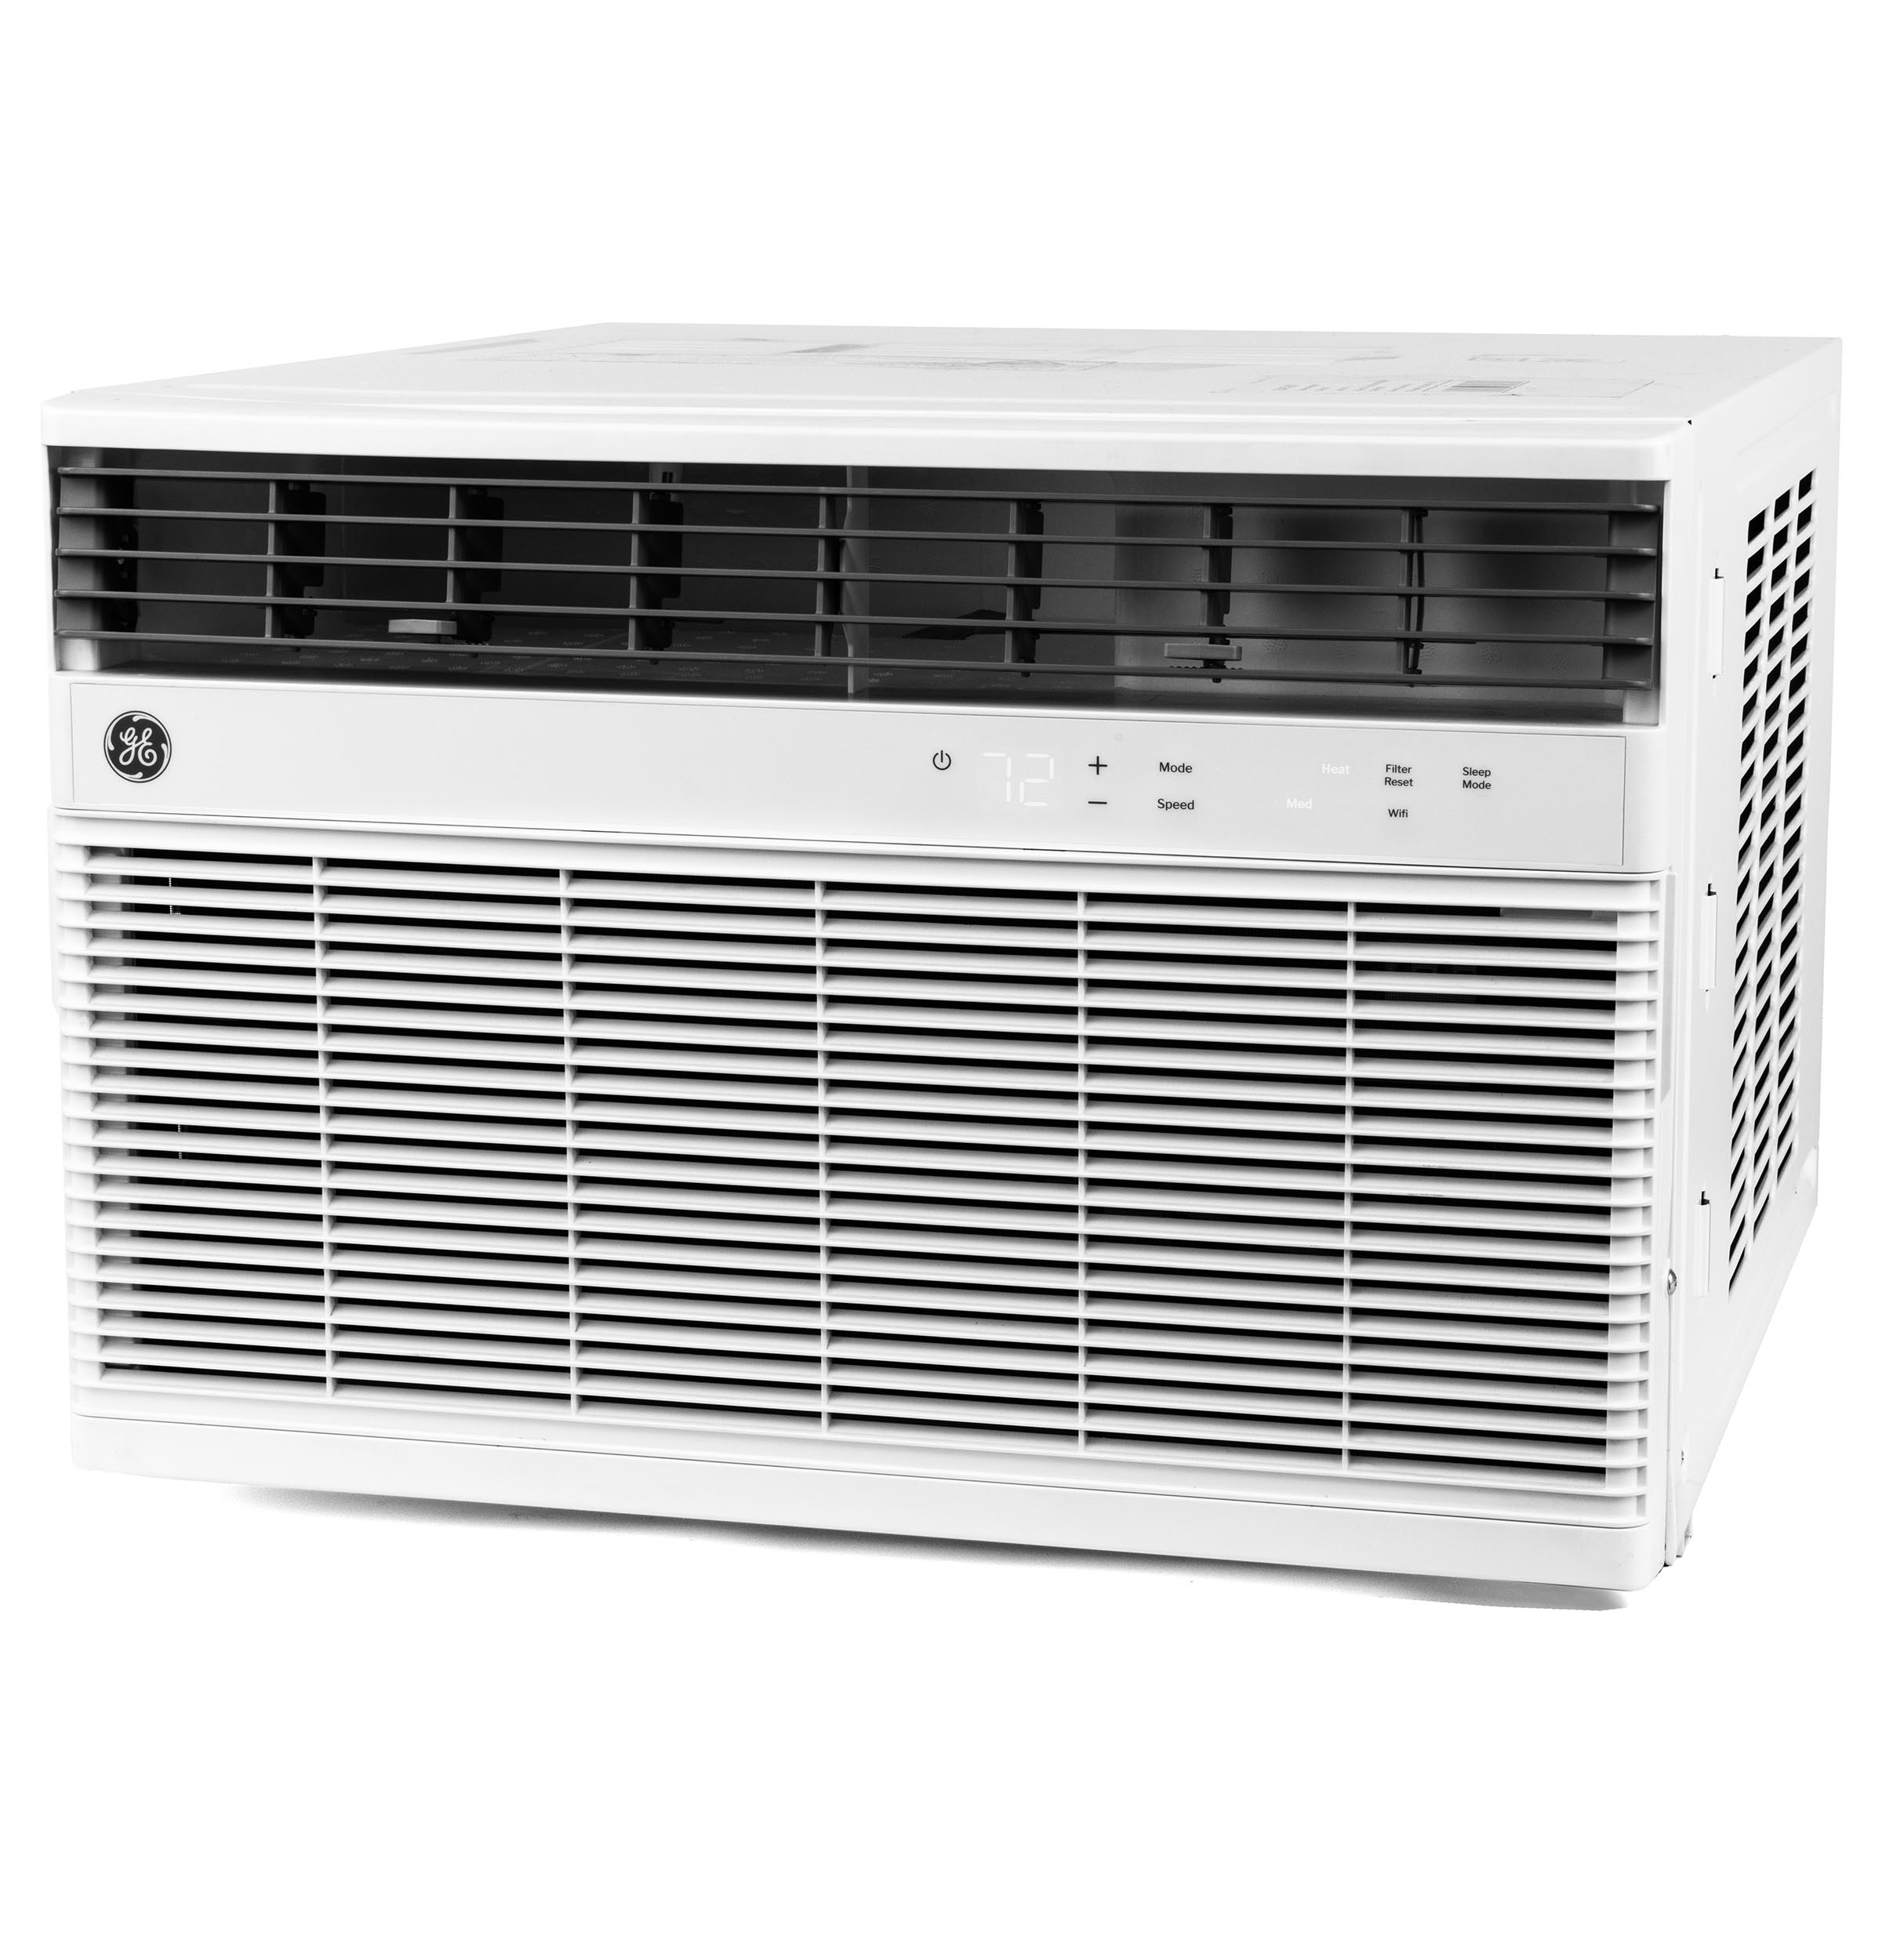 GE® 24,000 BTU Smart Heat/Cool Electronic Window Air Conditioner for Extra-Large Rooms up to 1,500 sq. ft.